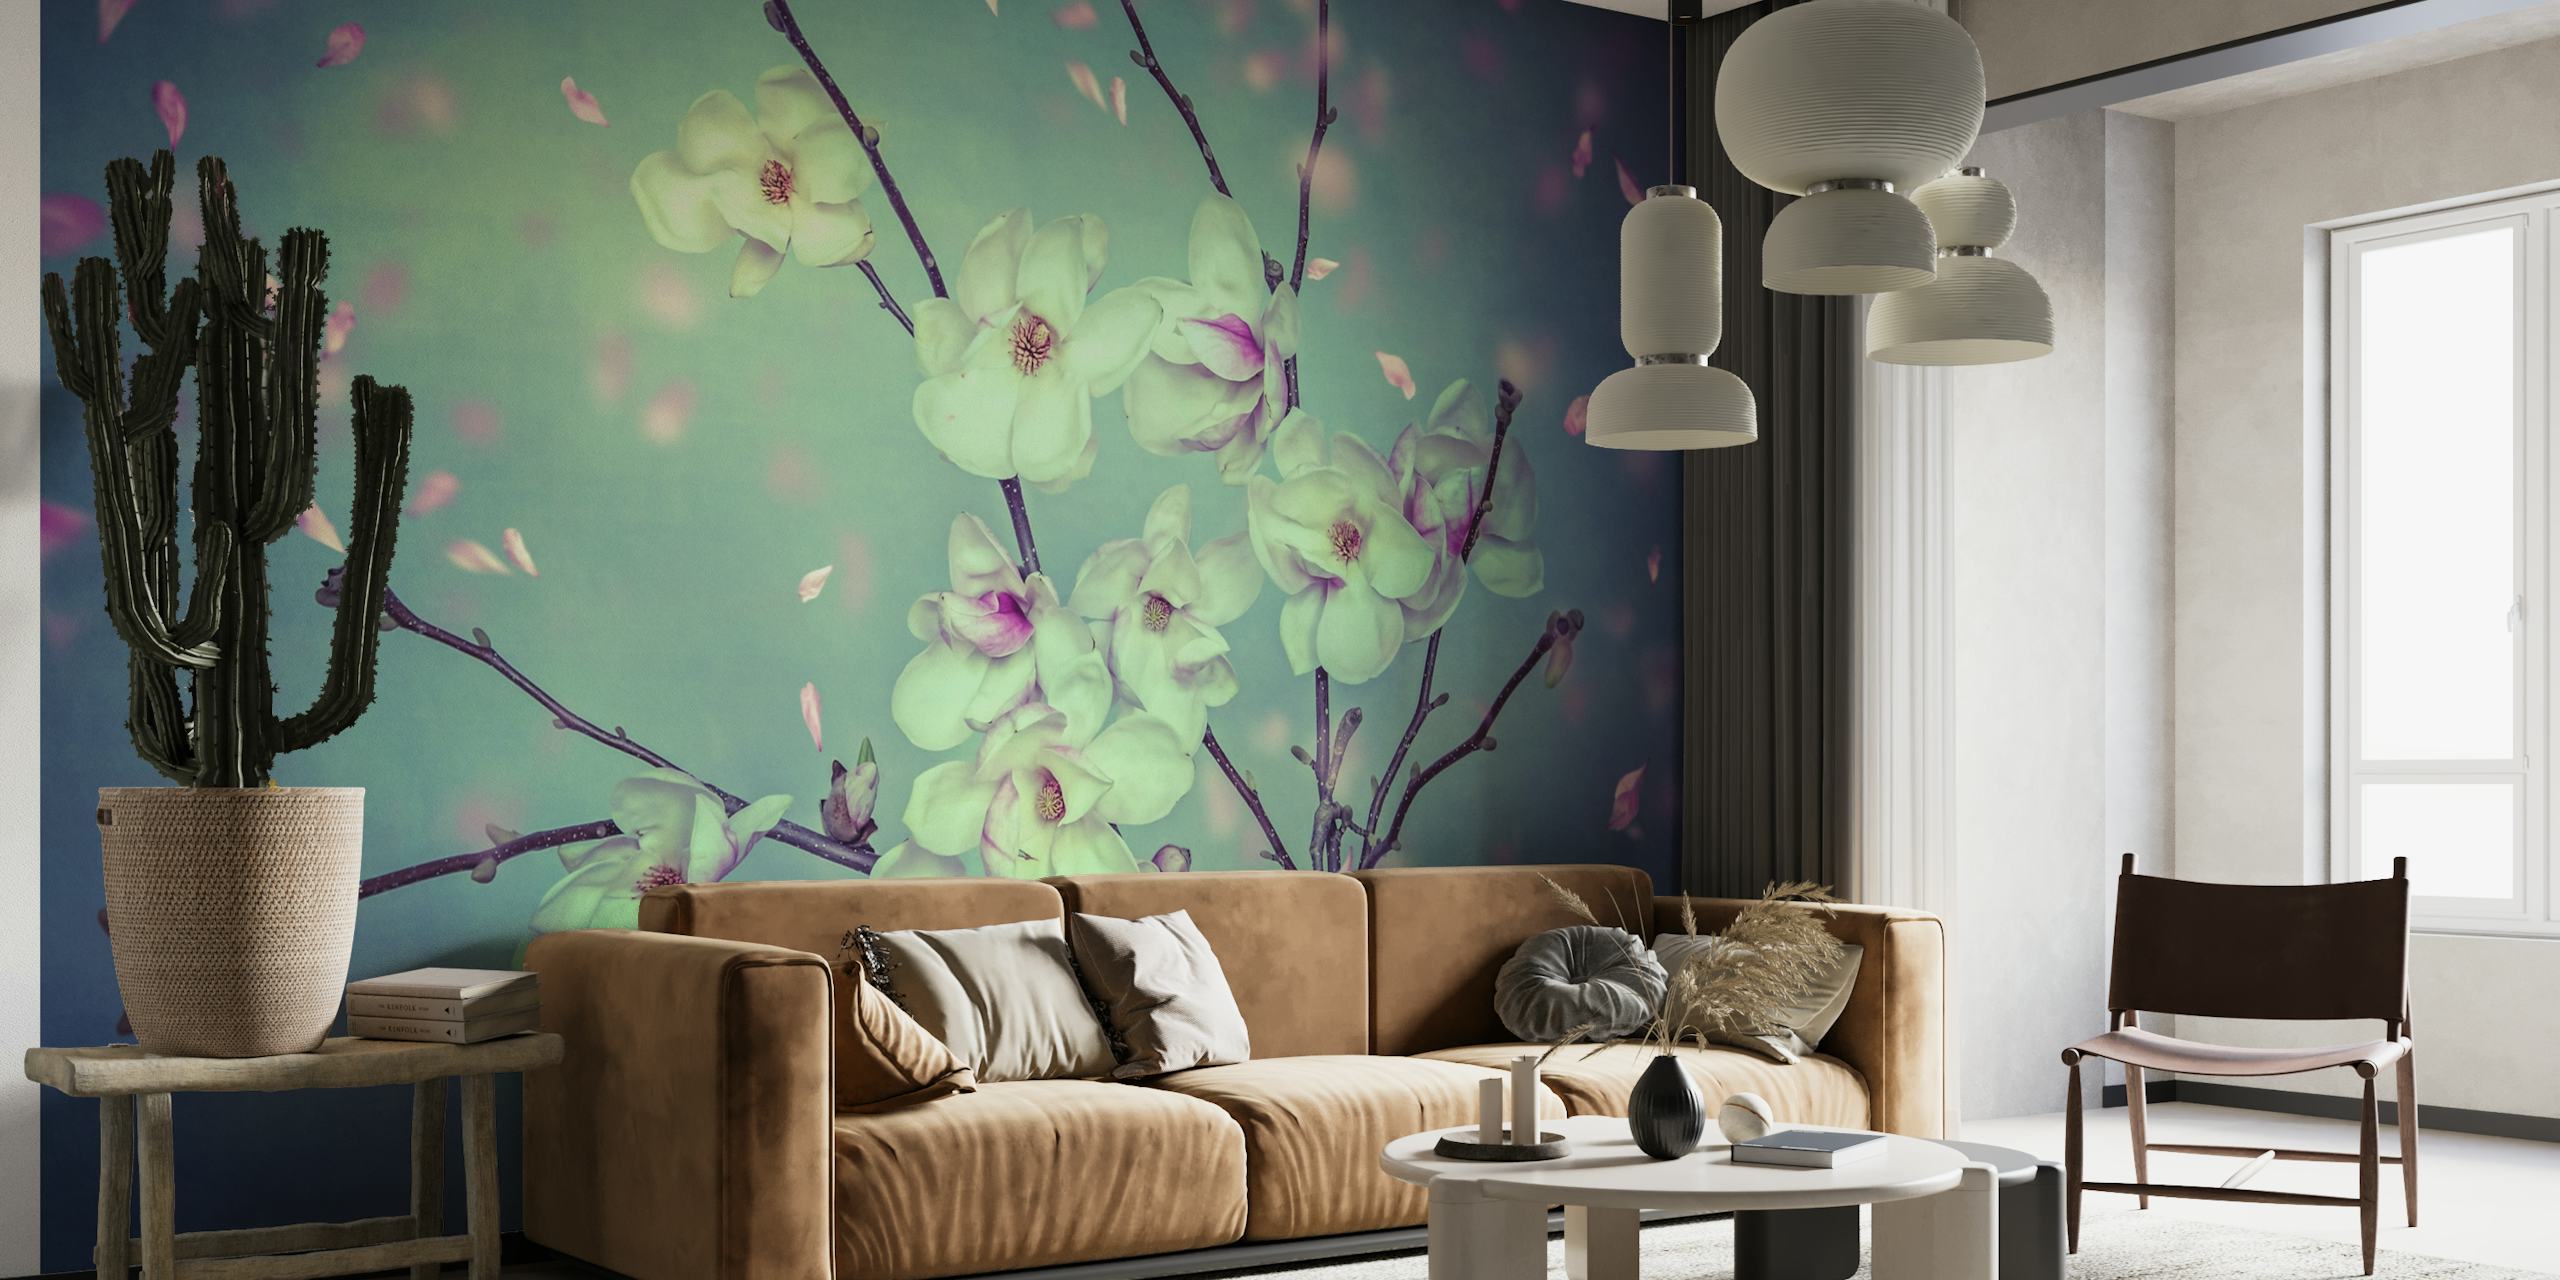 Ethereal magnolia blooms wall mural in a tranquil spring setting